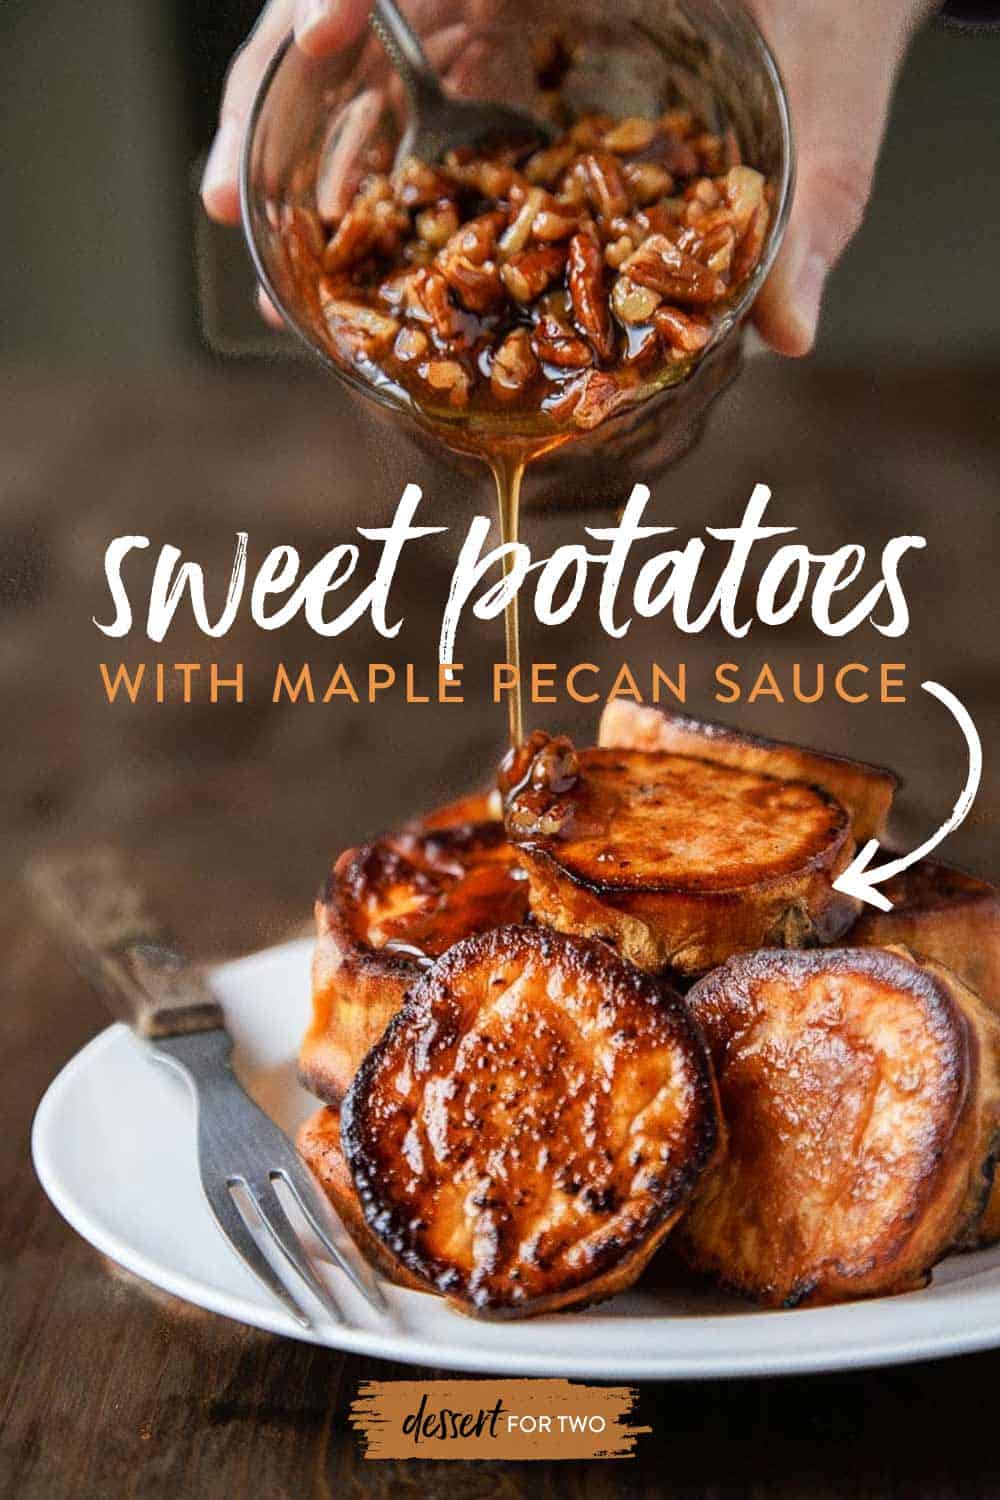 Melting Sweet Potatoes with Maple Pecan Sauce. Perfect roasted sweet potatoes with a sweet maple sticky sauce. Like regular melting potatoes, but made with sweet potatoes!